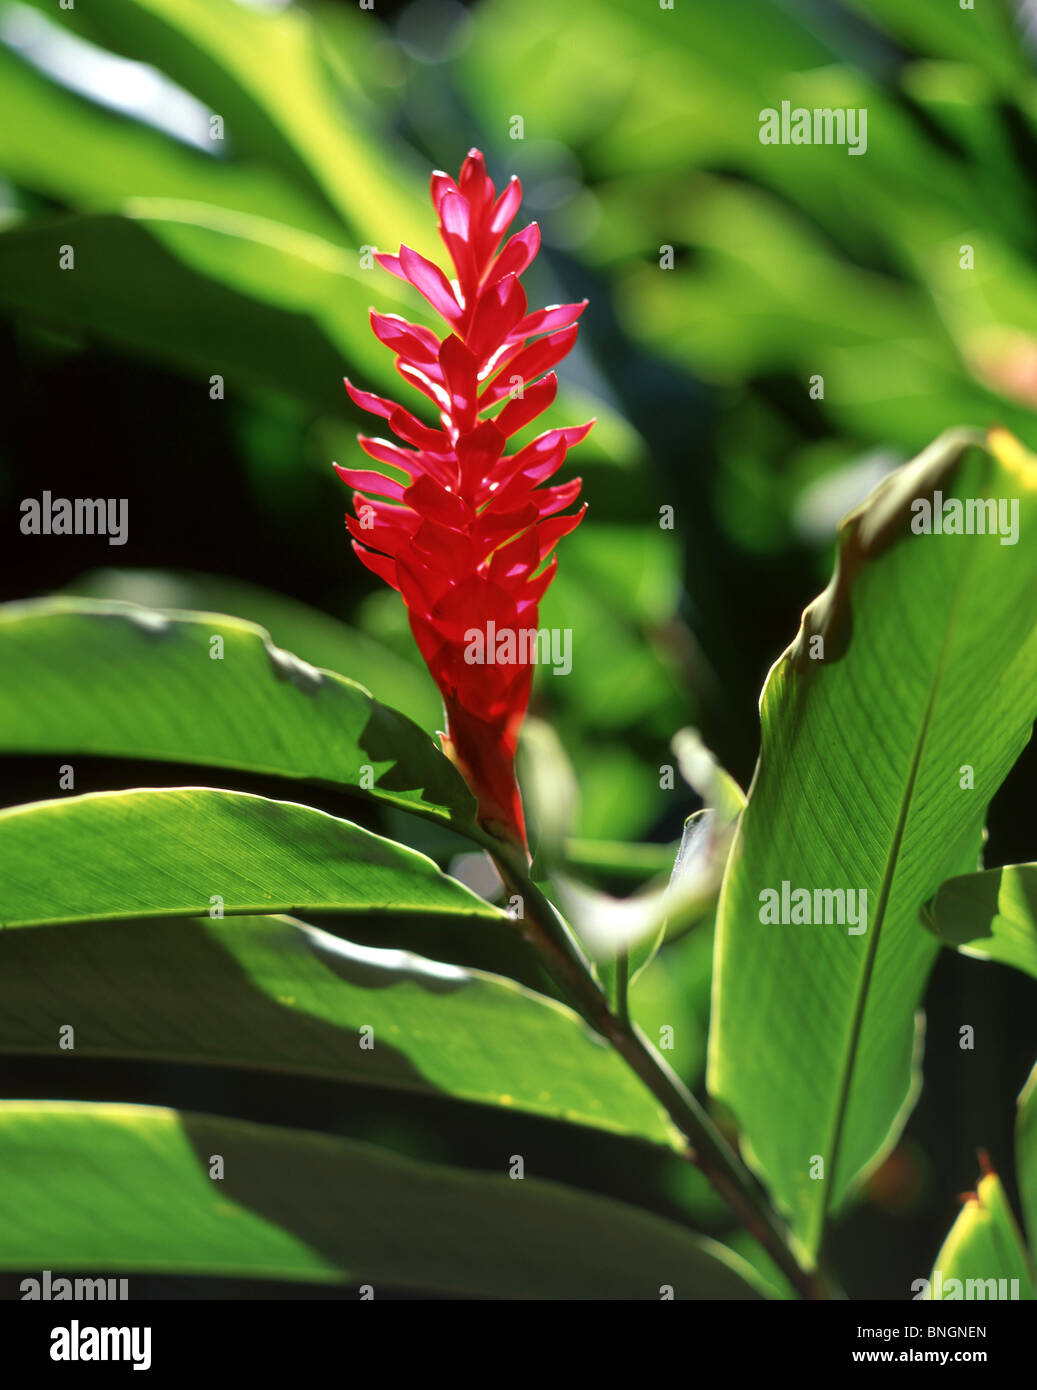 Ginger Lily Plant Oahu Hawaii United States Of America Stock Photo Alamy